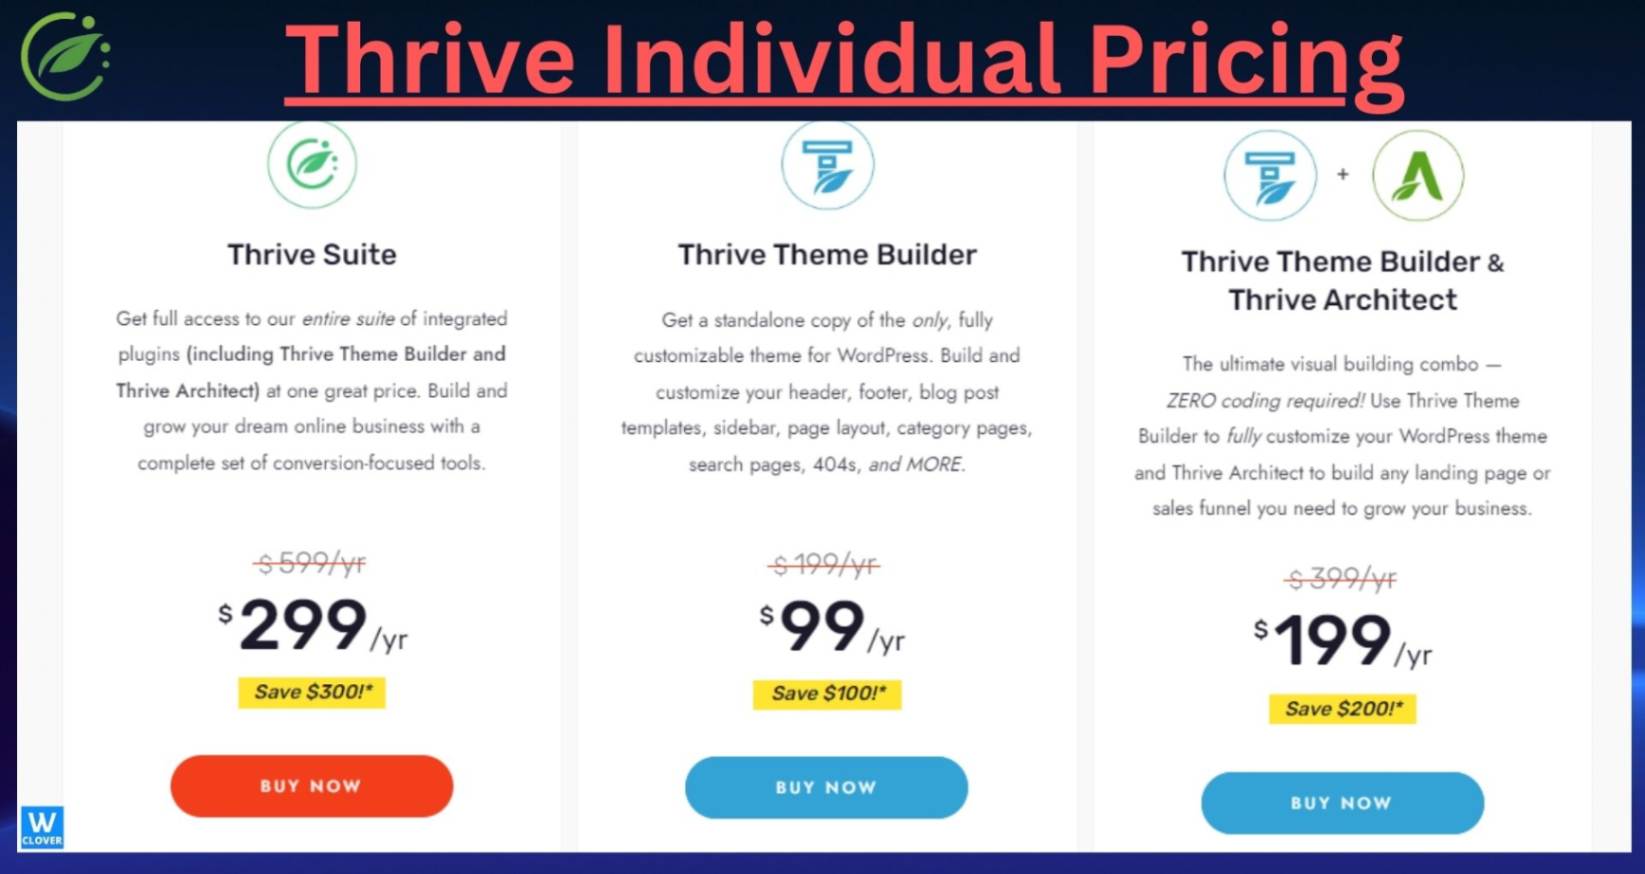 Thrive Price individual elements